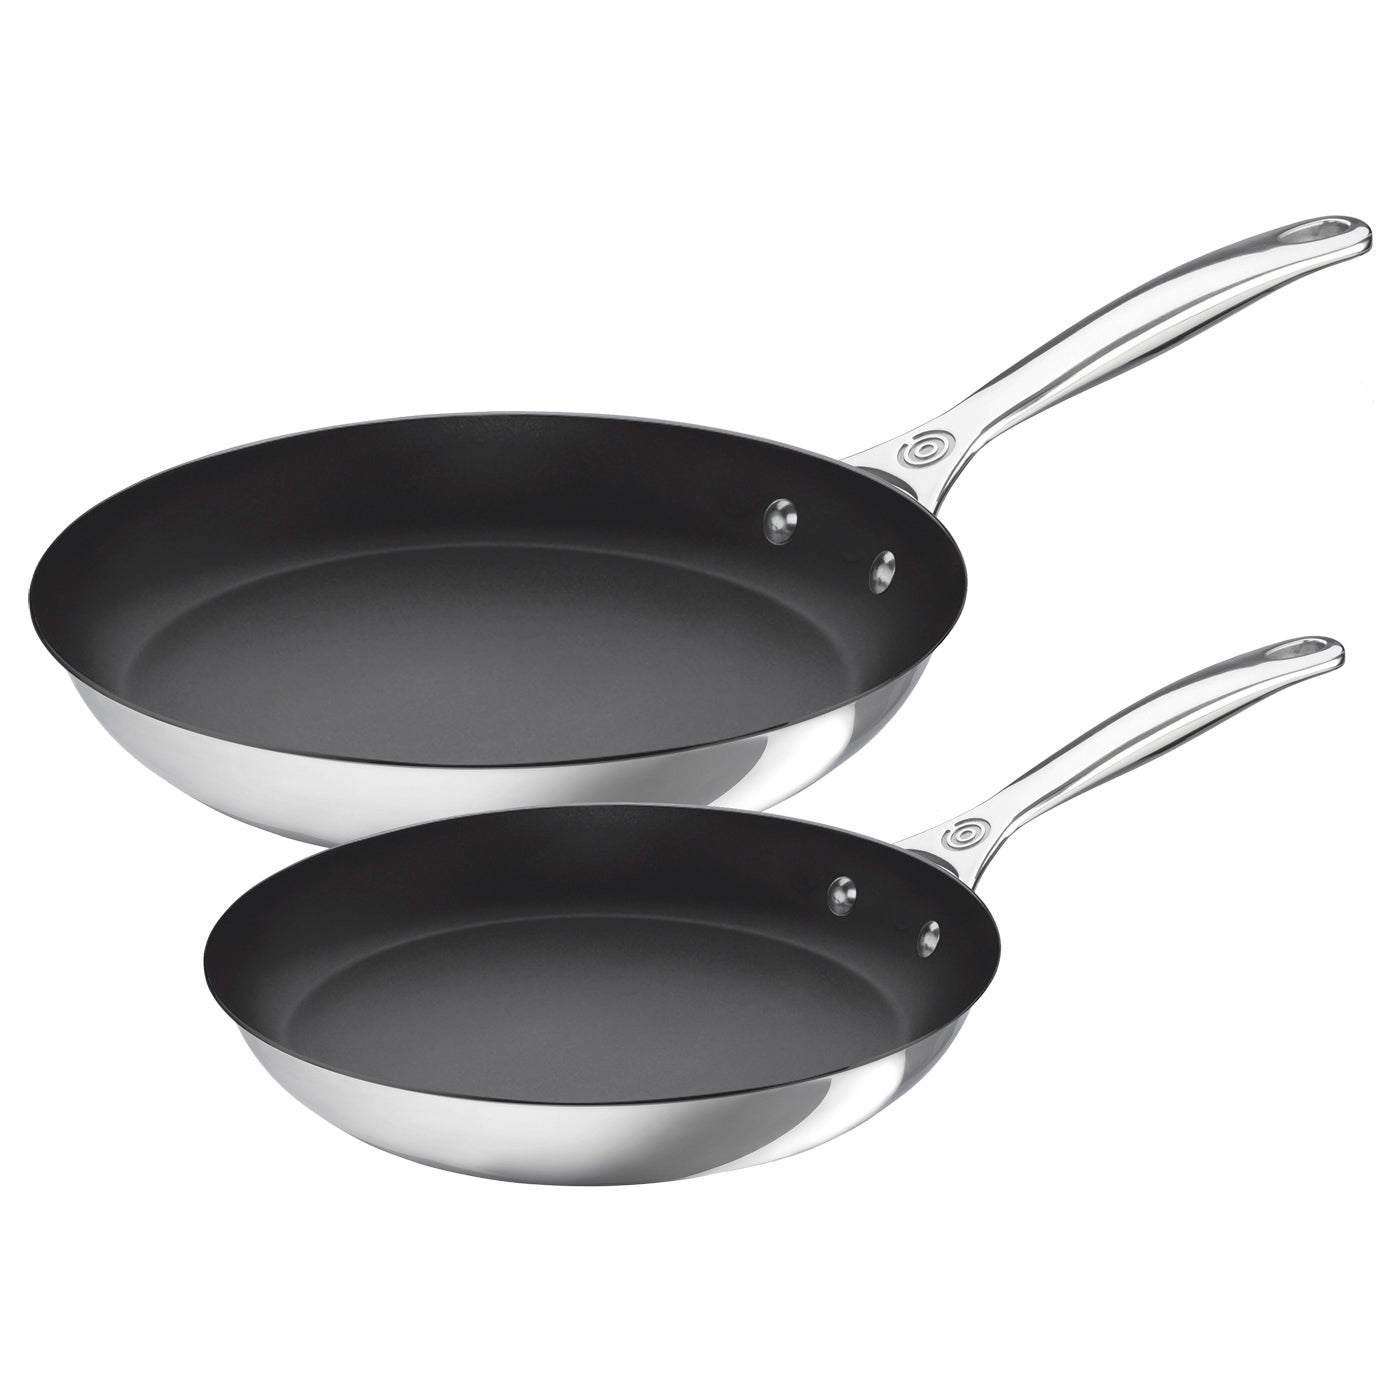 Le Creuset 2-Piece Nonstick Fry Pan Set - Stainless Steel – Chef's